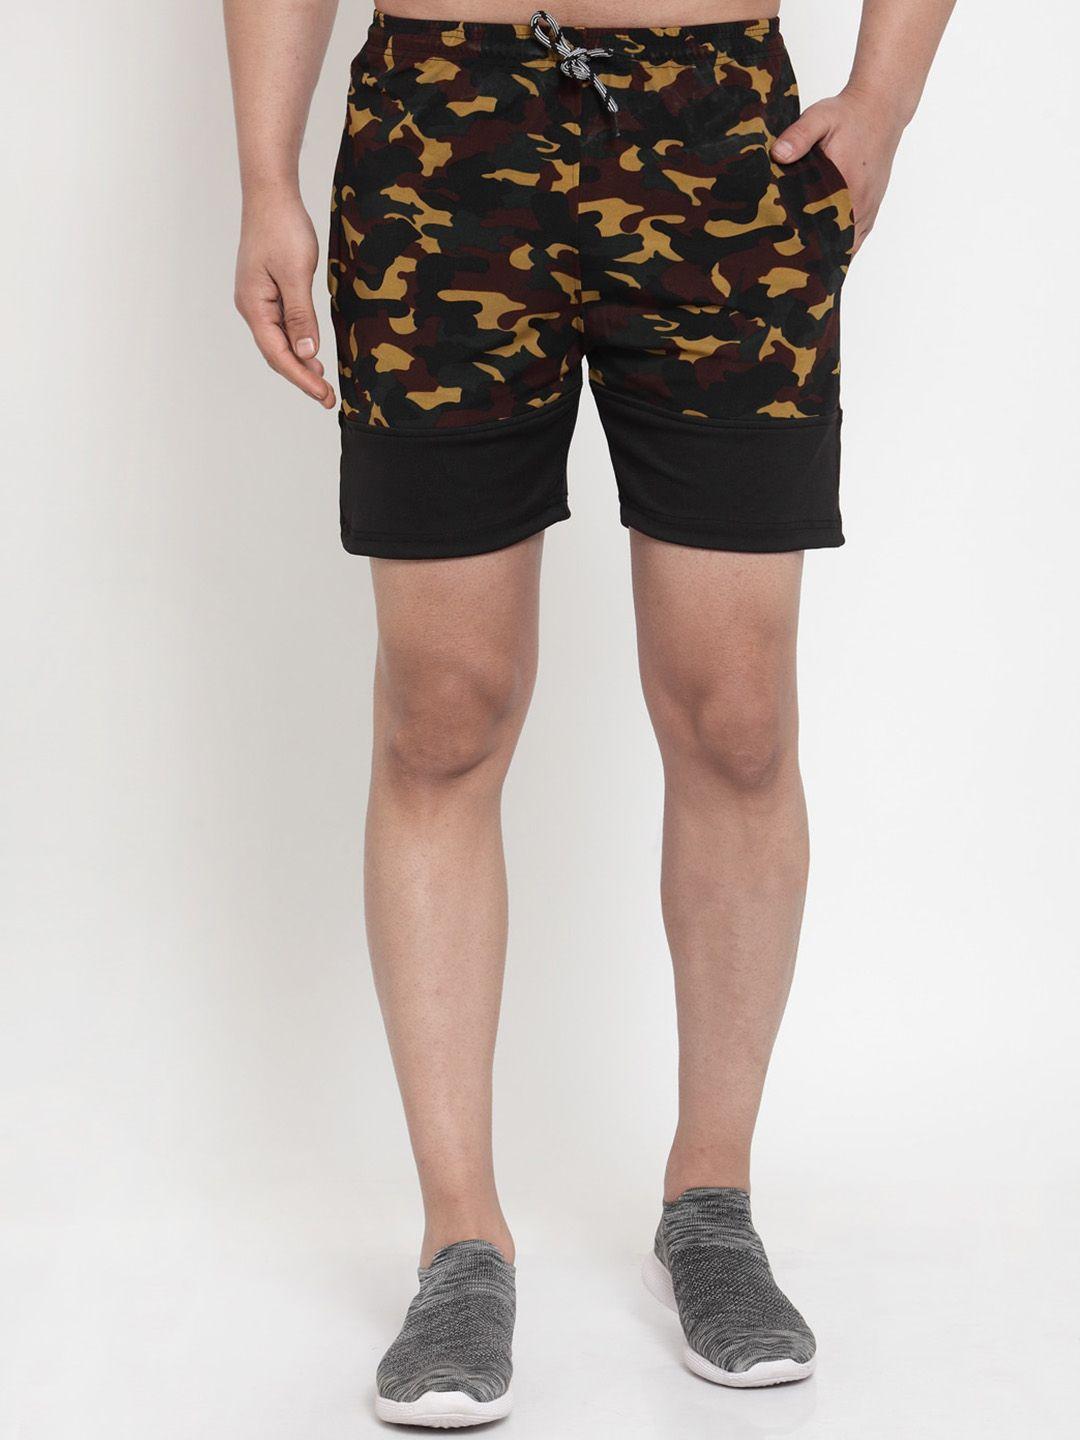 klotthe camouflage printed rapid dry sports shorts